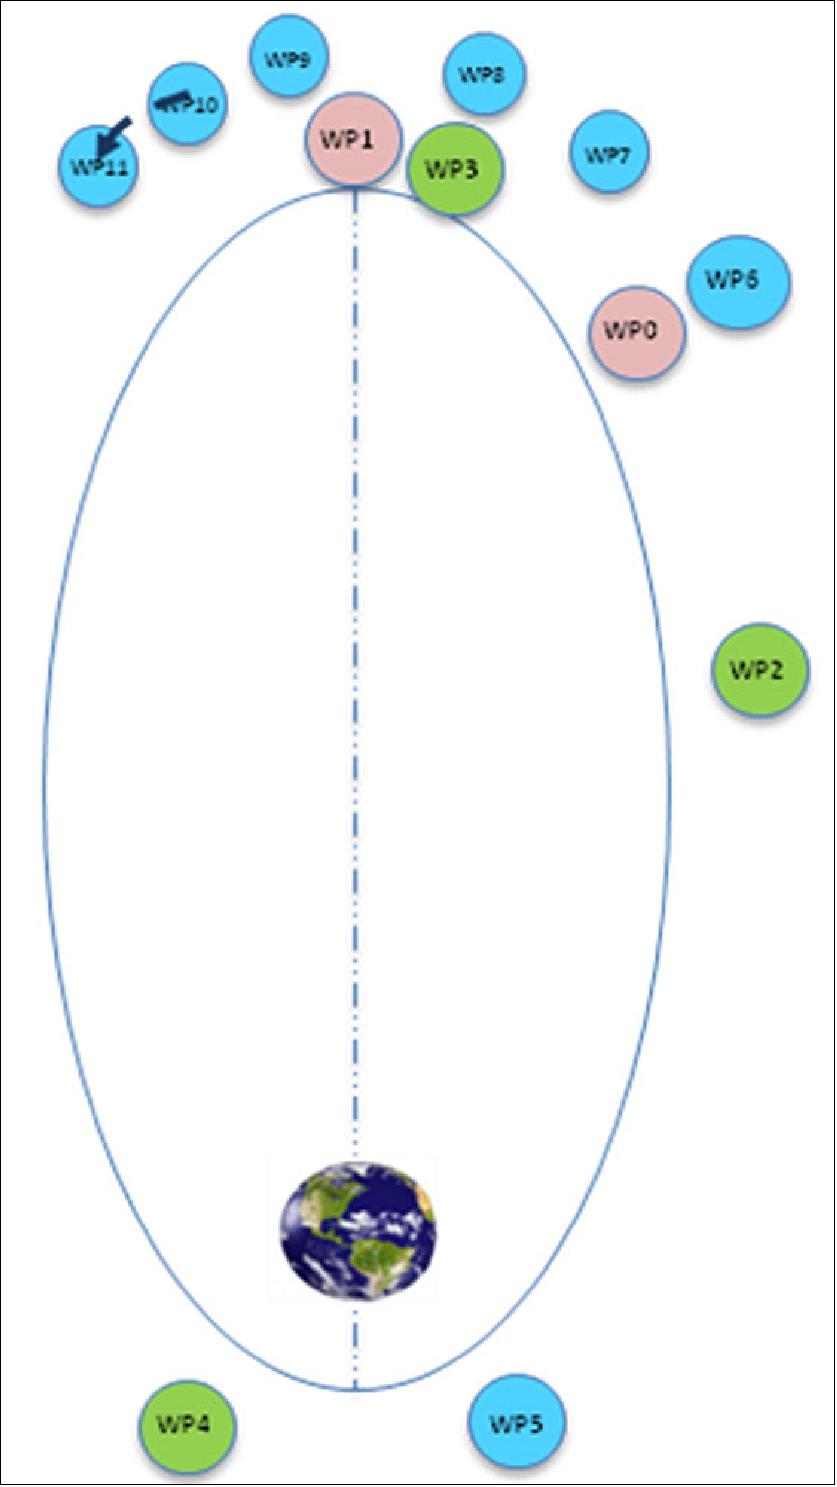 Figure 65: Waypoints location around the orbit for Part A+B1 of the RVX (image credit: P3RVX Team)